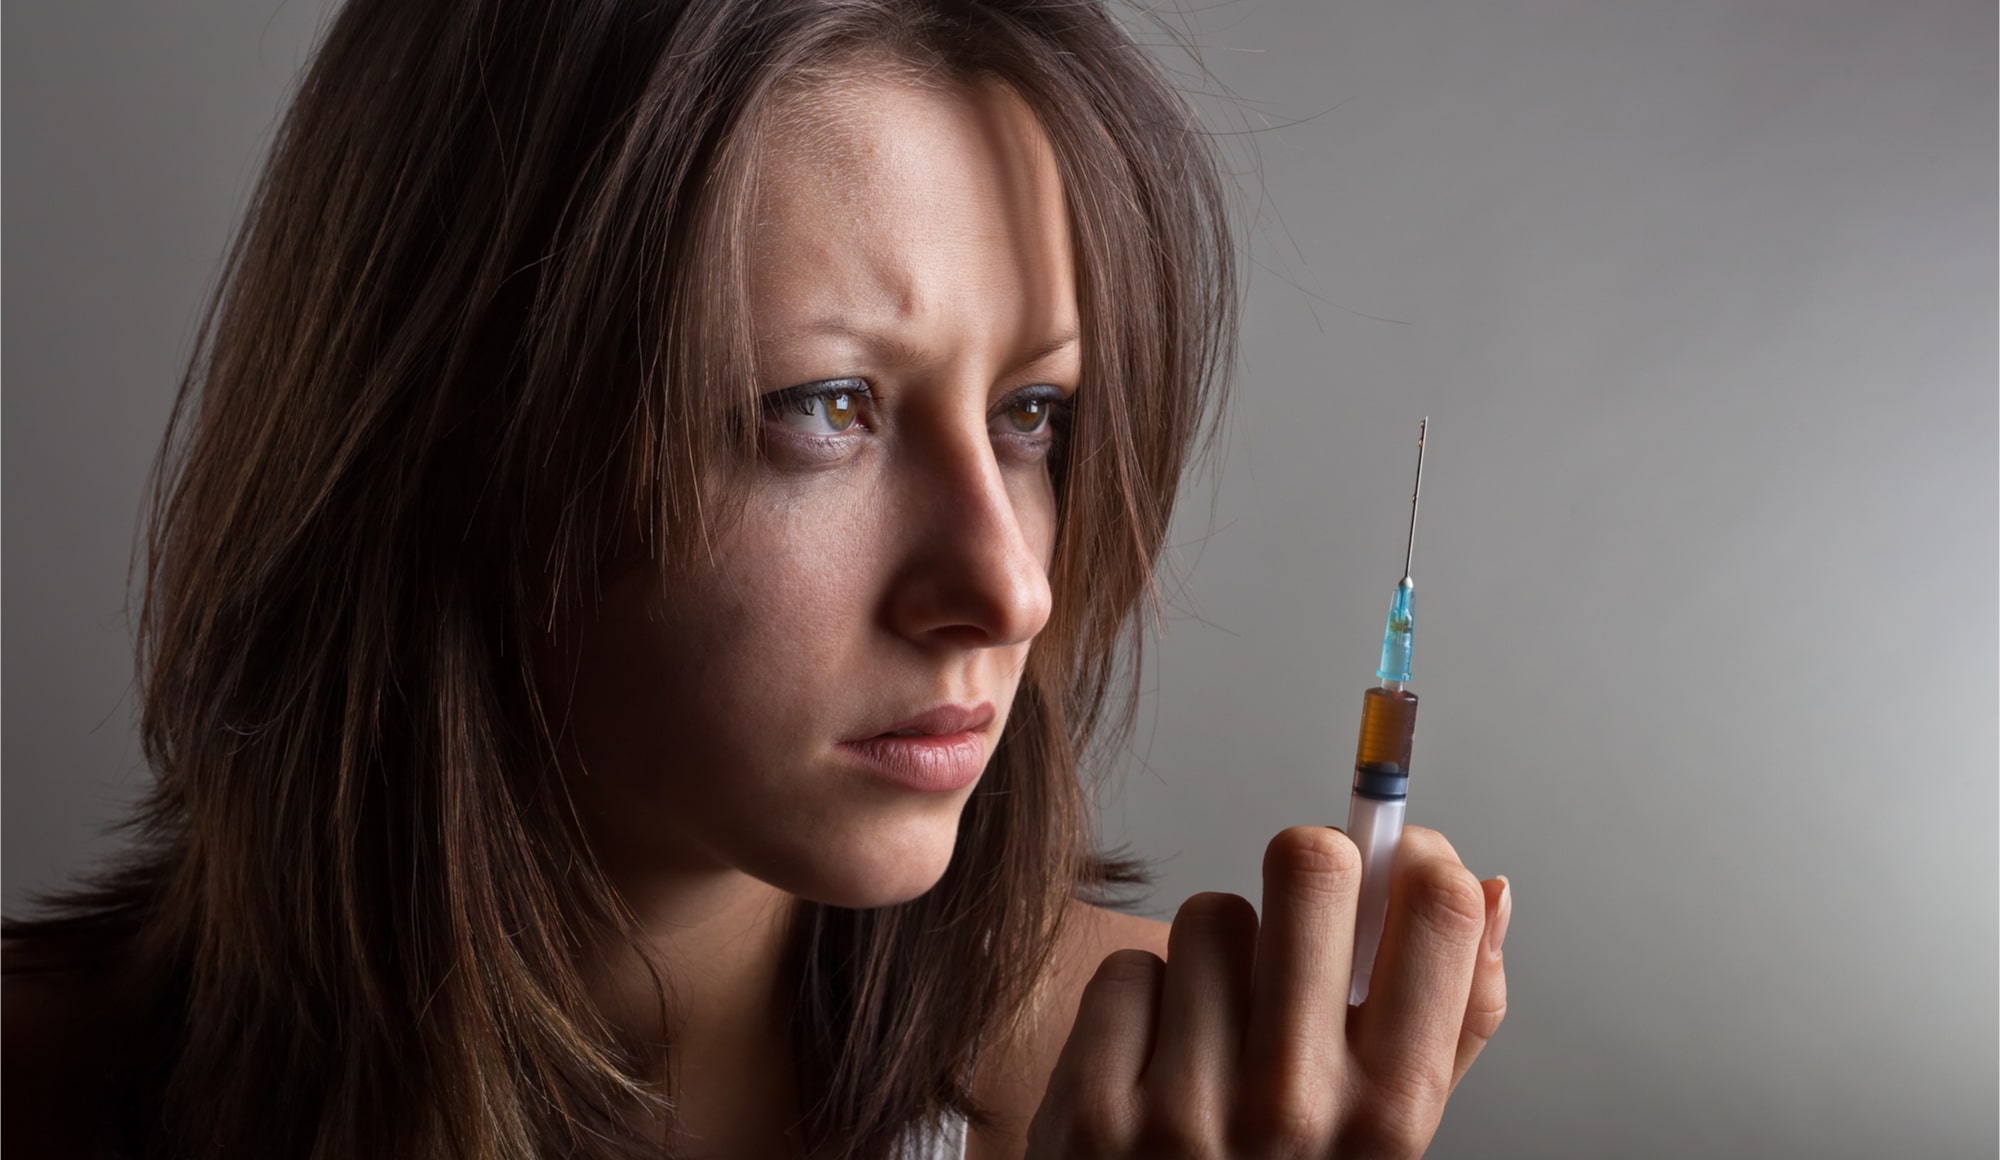 Heroin Addiction What to Watch For Pathfinders - A woman stares at a needle with heroin in it. If you think a loved one is addicted to heroin you need to how to tell if someone is on heroin by looking for the signs here.